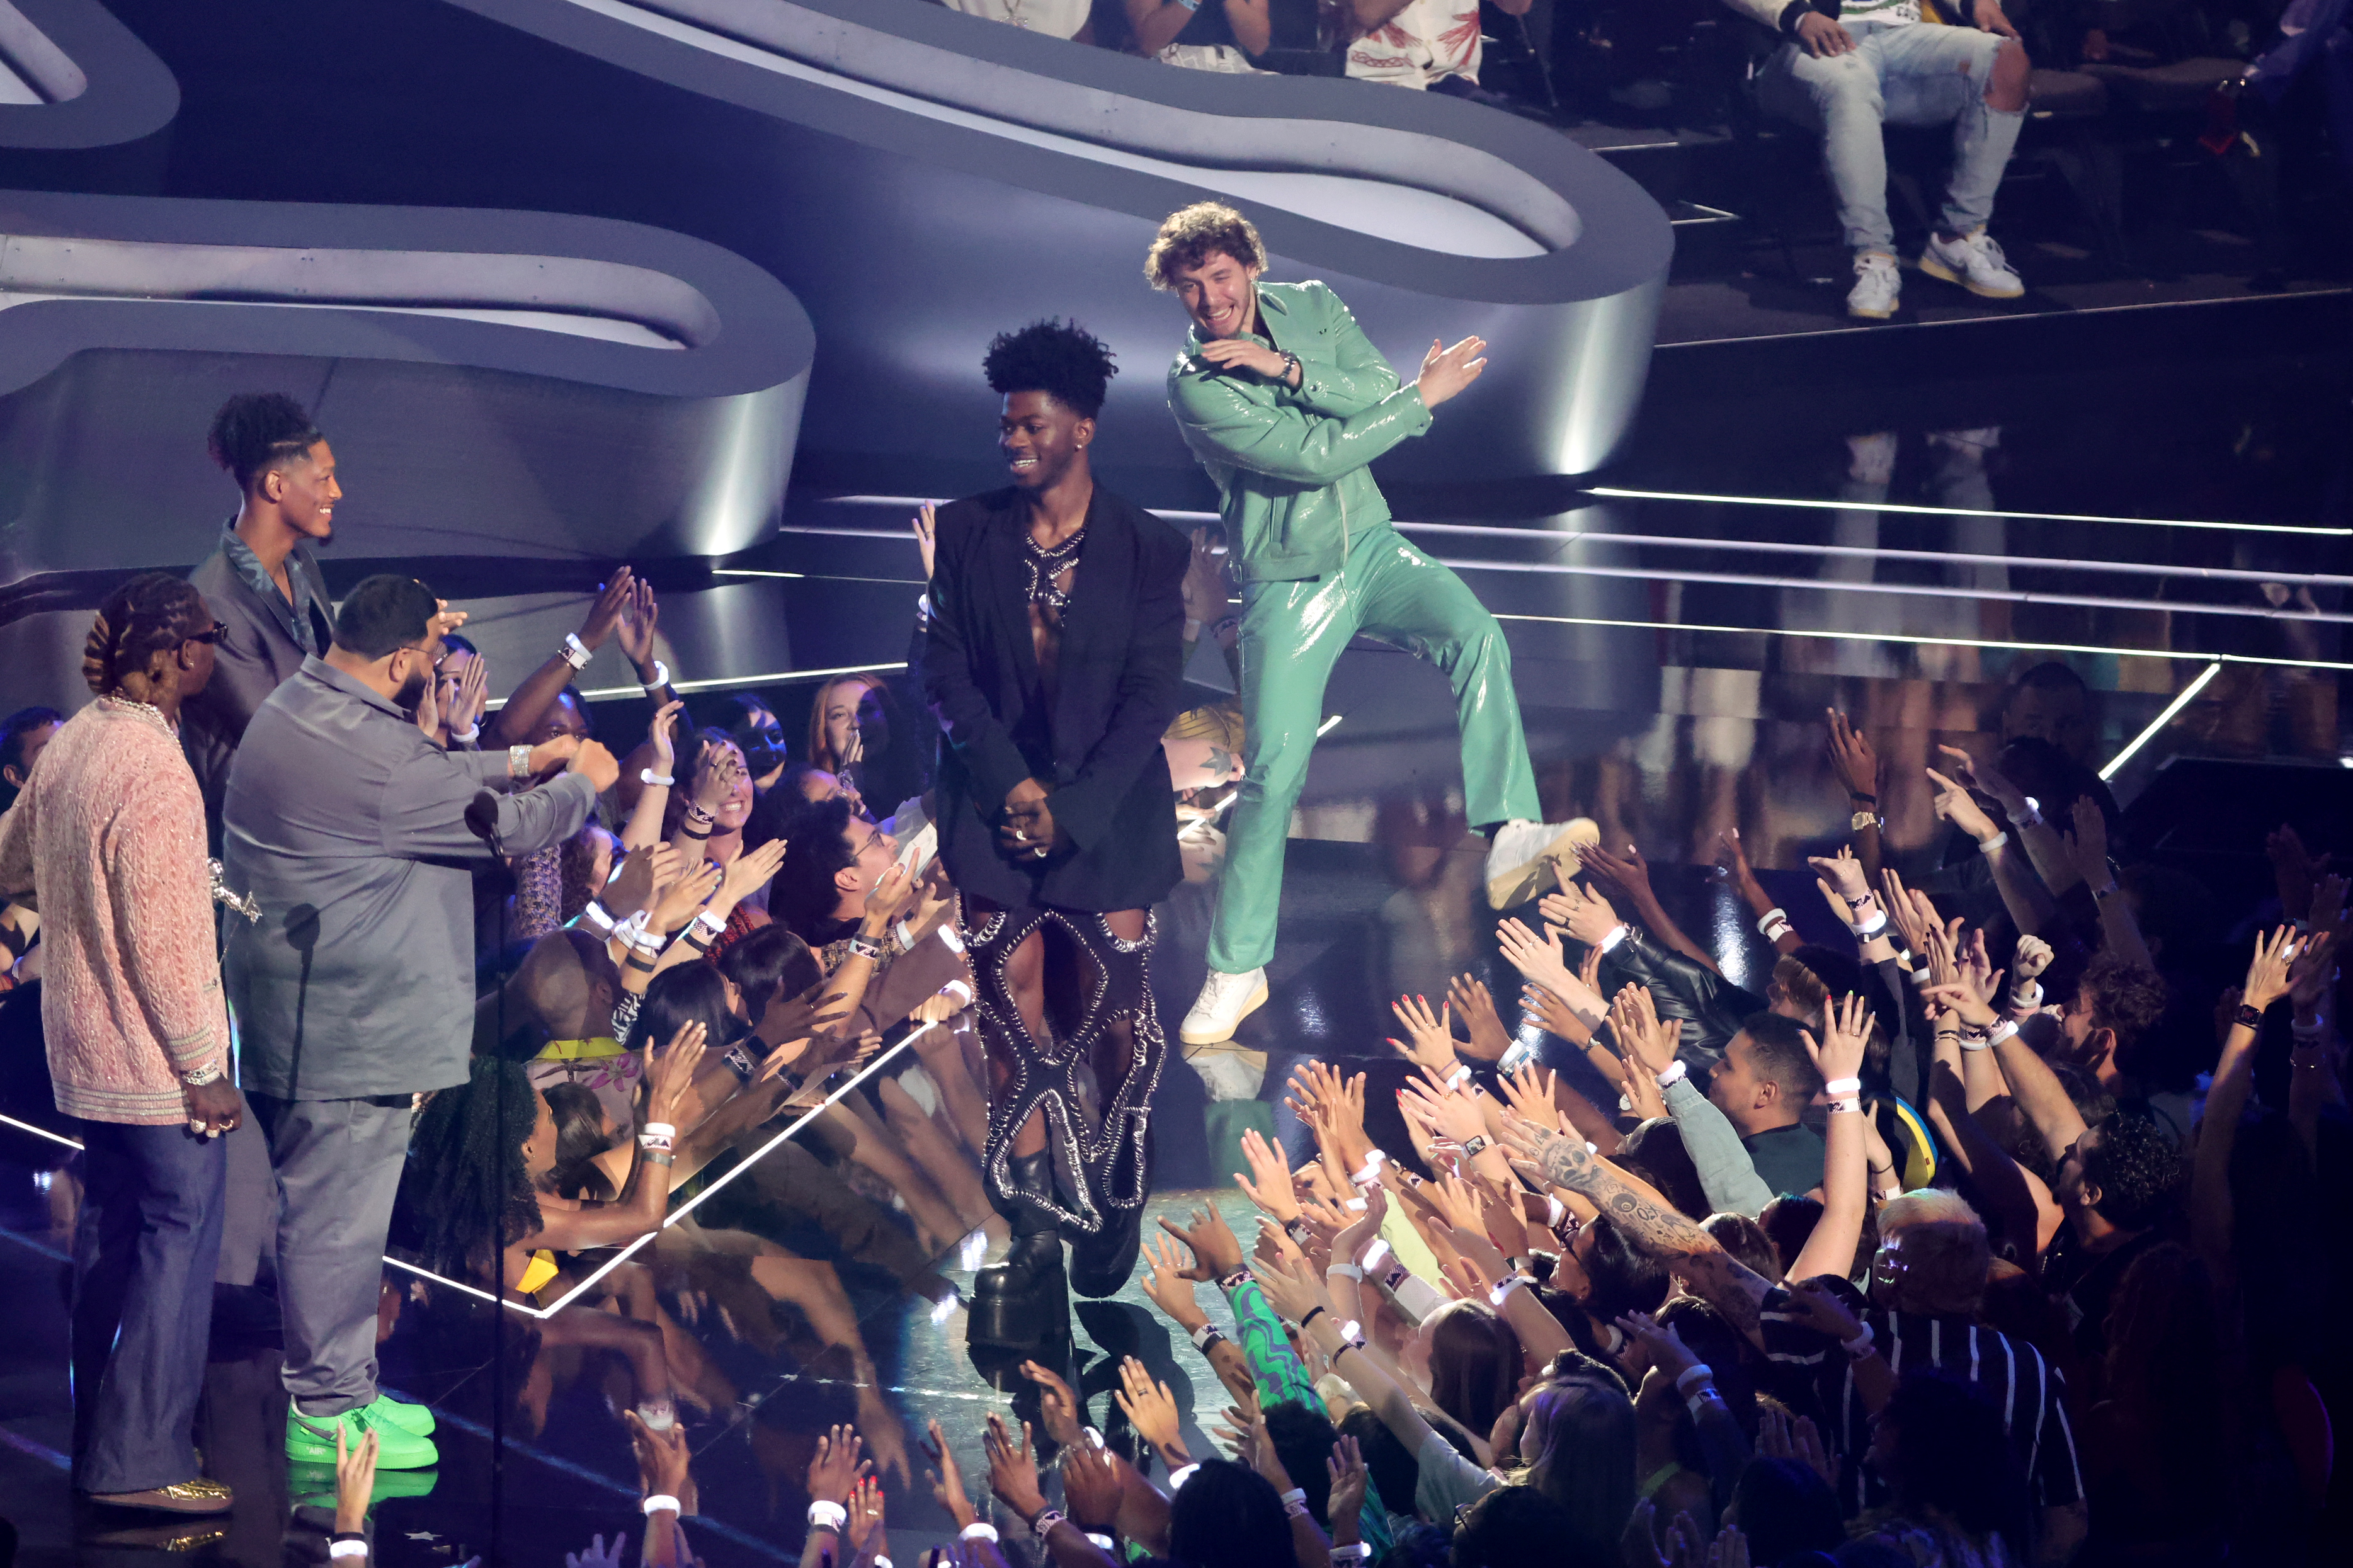 Lil Nas X and Jack Harlow accept an award onstage at the 2022 MTV VMAs at Prudential Center on August 28, 2022 in Newark, New Jersey. | Source: Getty Images